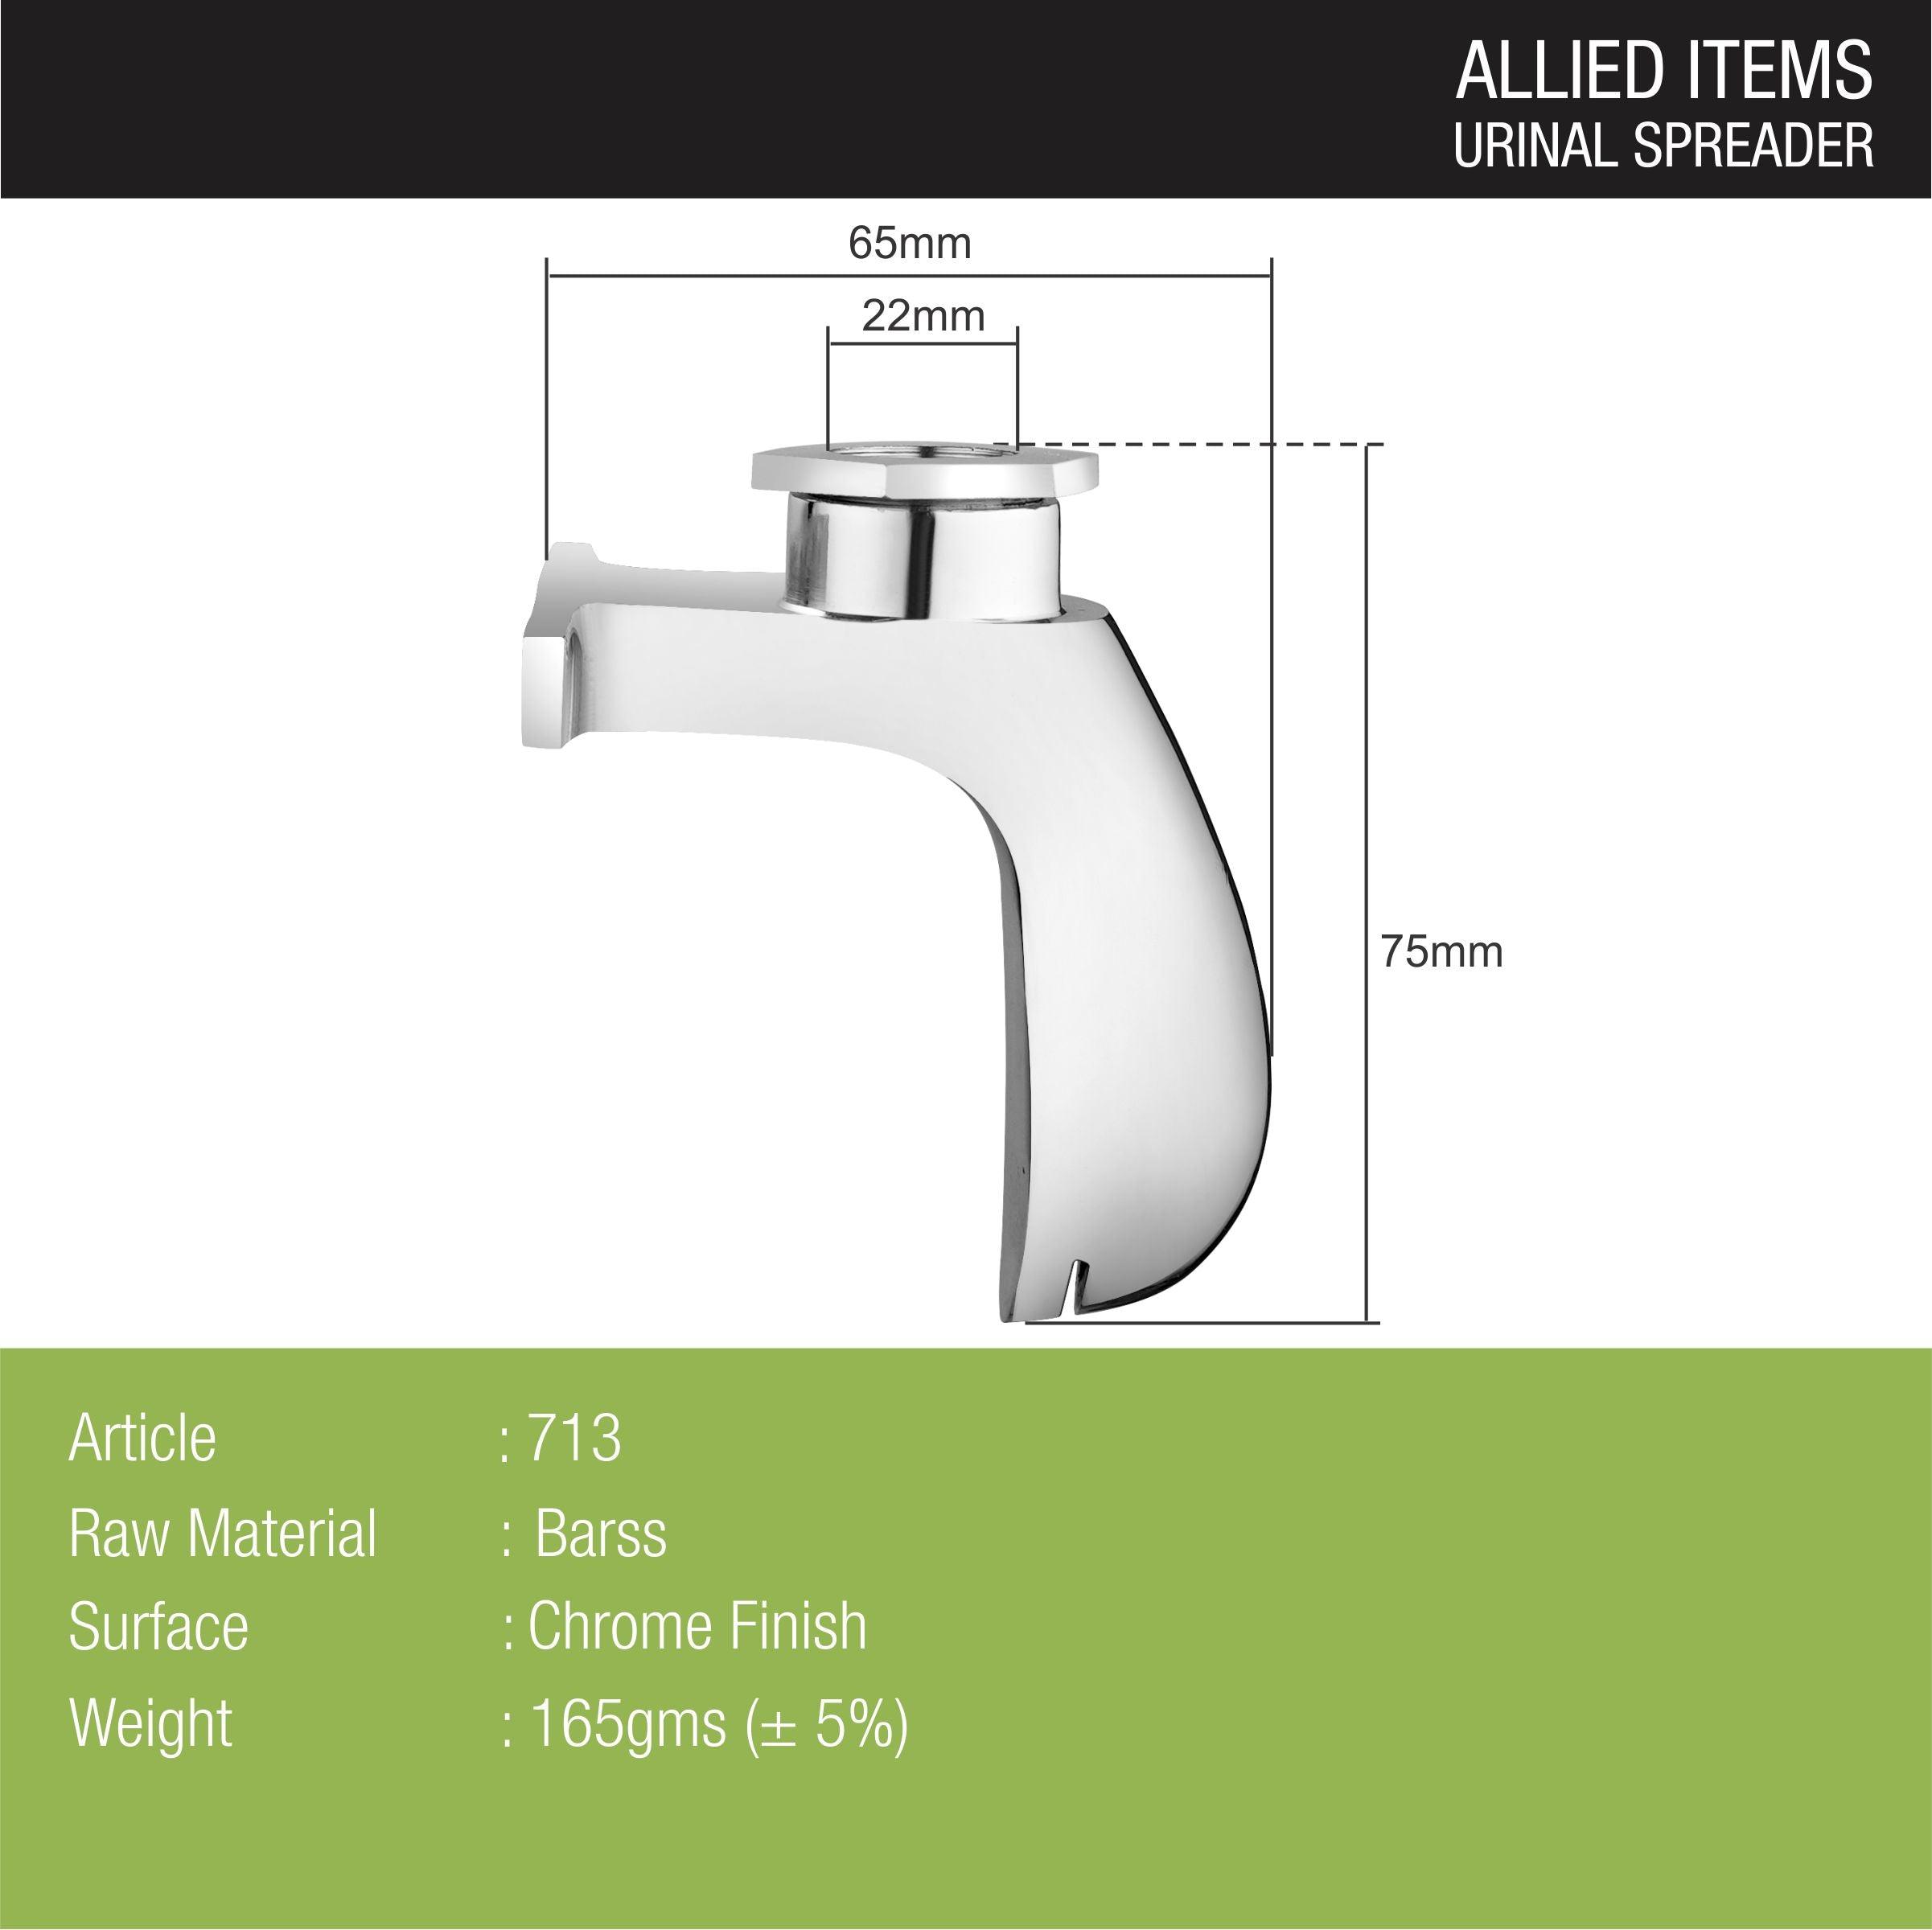 Urinal Spreader sizes and dimensions